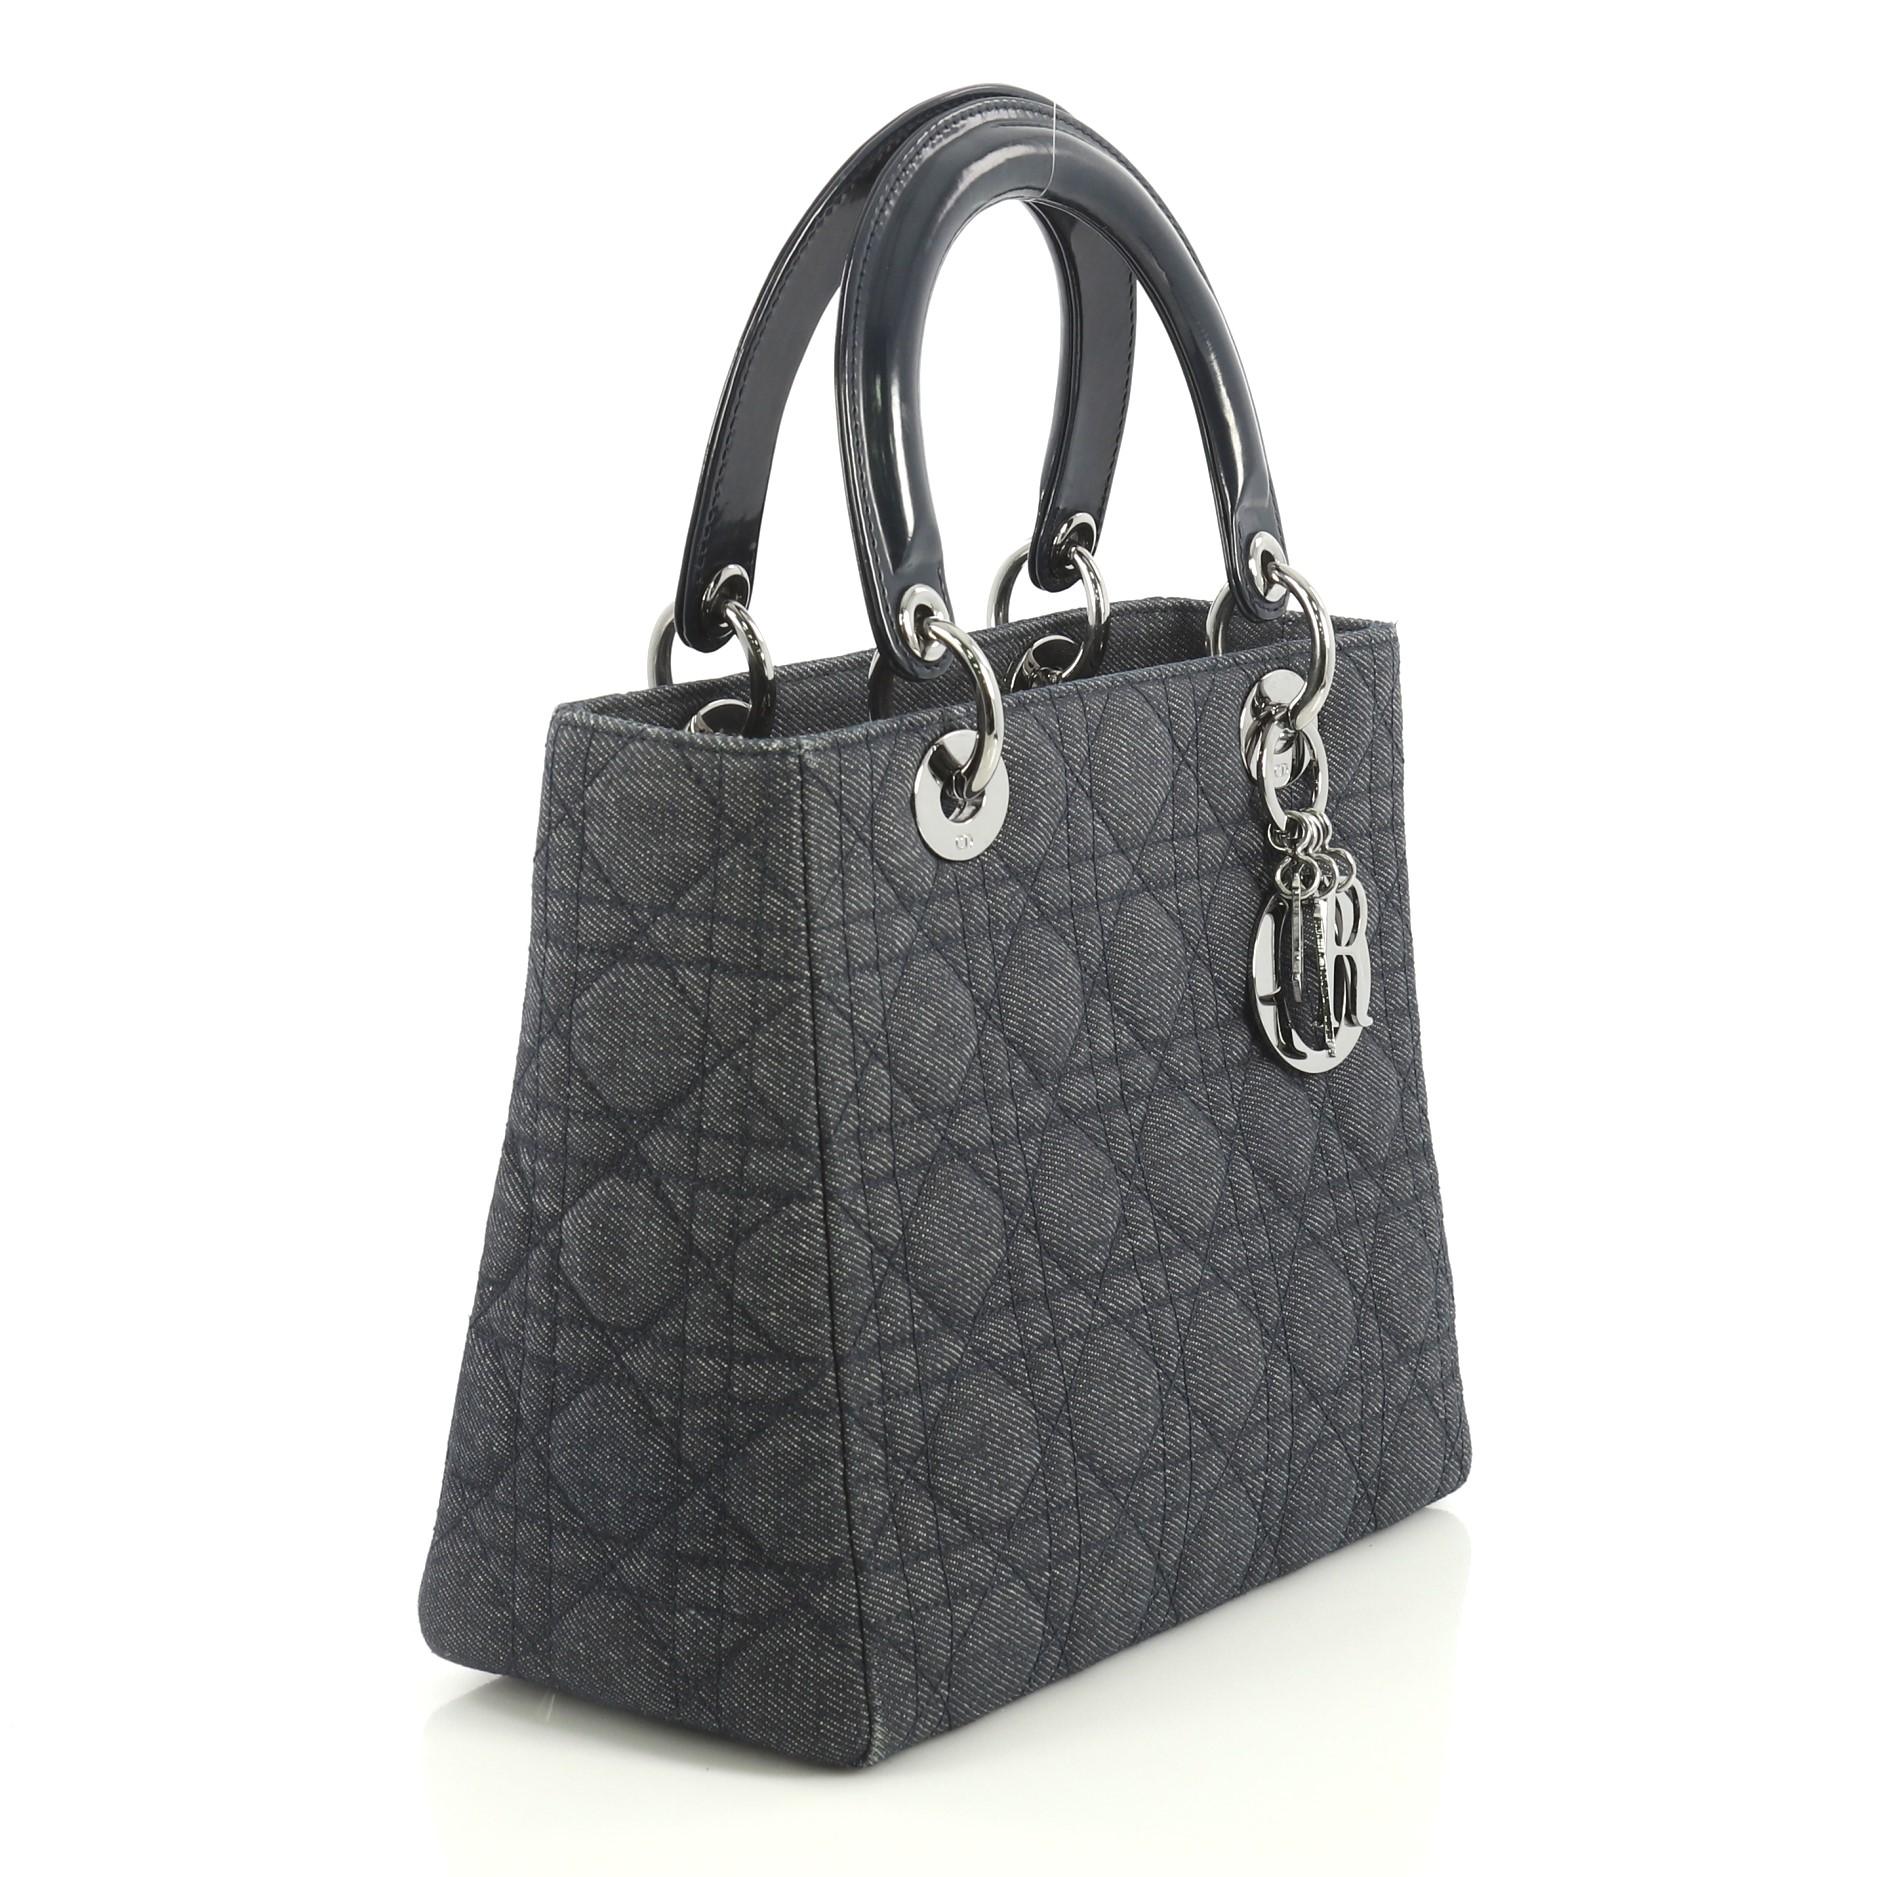 This Christian Dior Vintage Lady Dior Handbag Cannage Quilt Denim Medium, crafted in blue cannage quilted denim, features short dual handles with Dior charms and gunmetal-tone hardware. Its zip closure opens to a blue fabric interior with zip